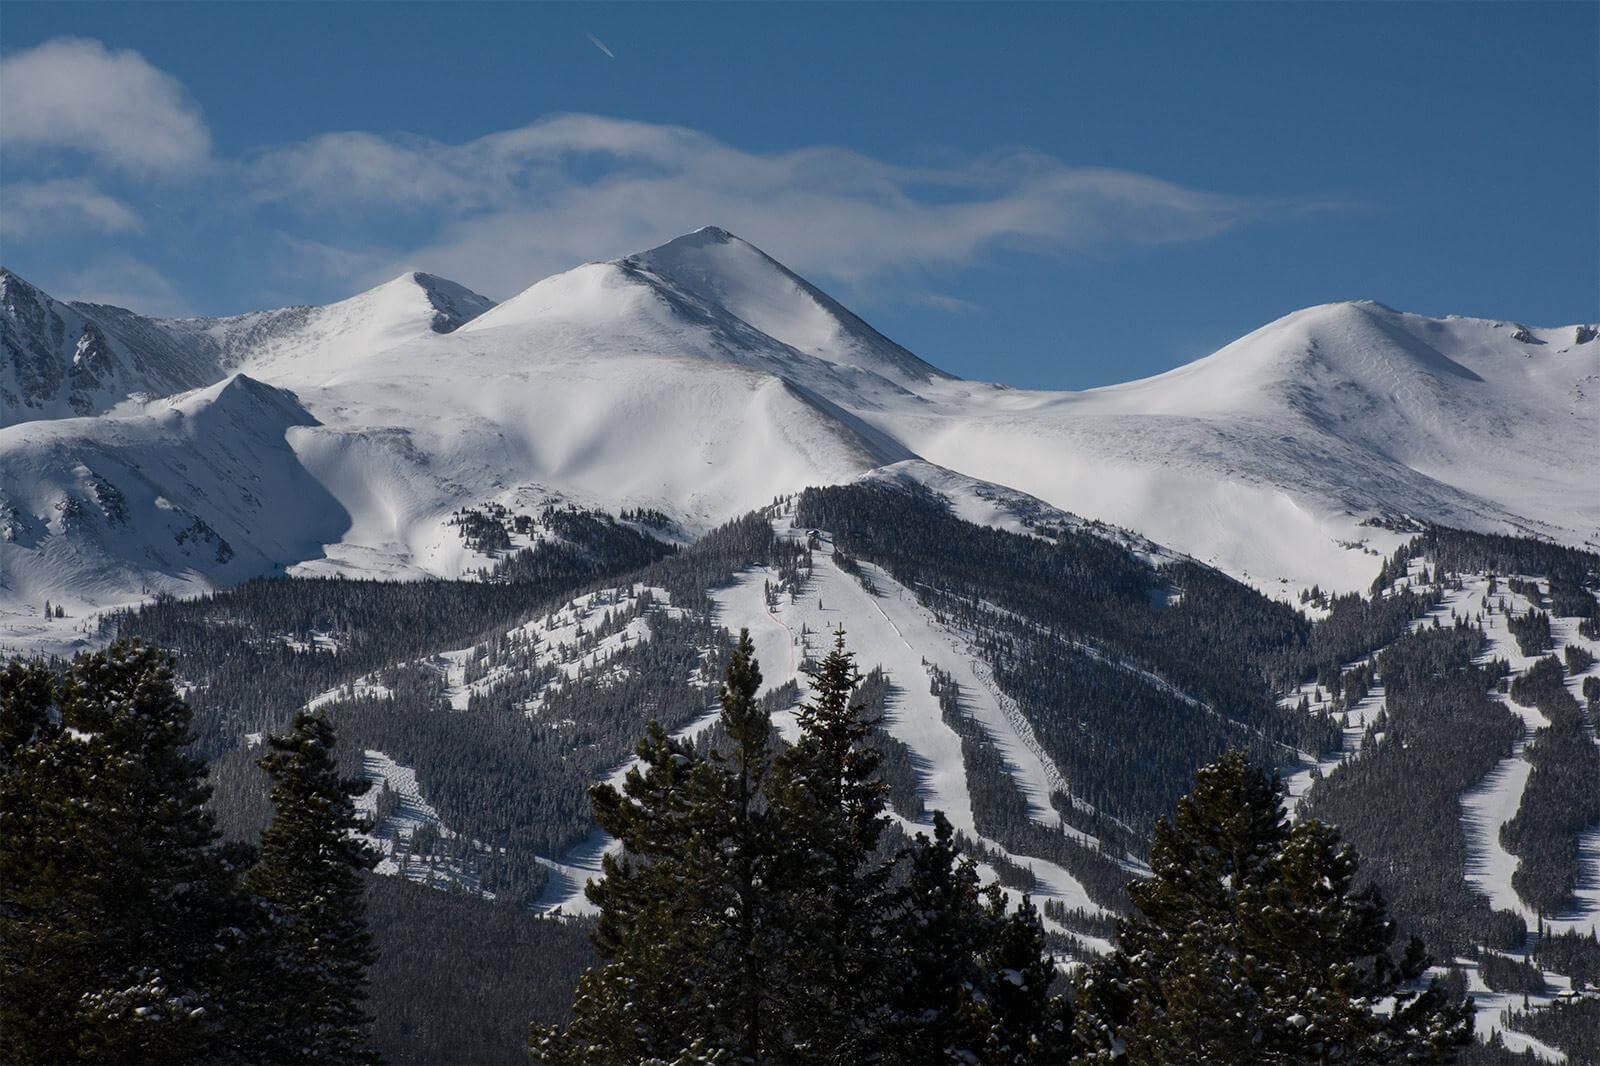 a guide to the larger neighborhoods in Breckenridge, Colorado with links to subdivisions and their current listings